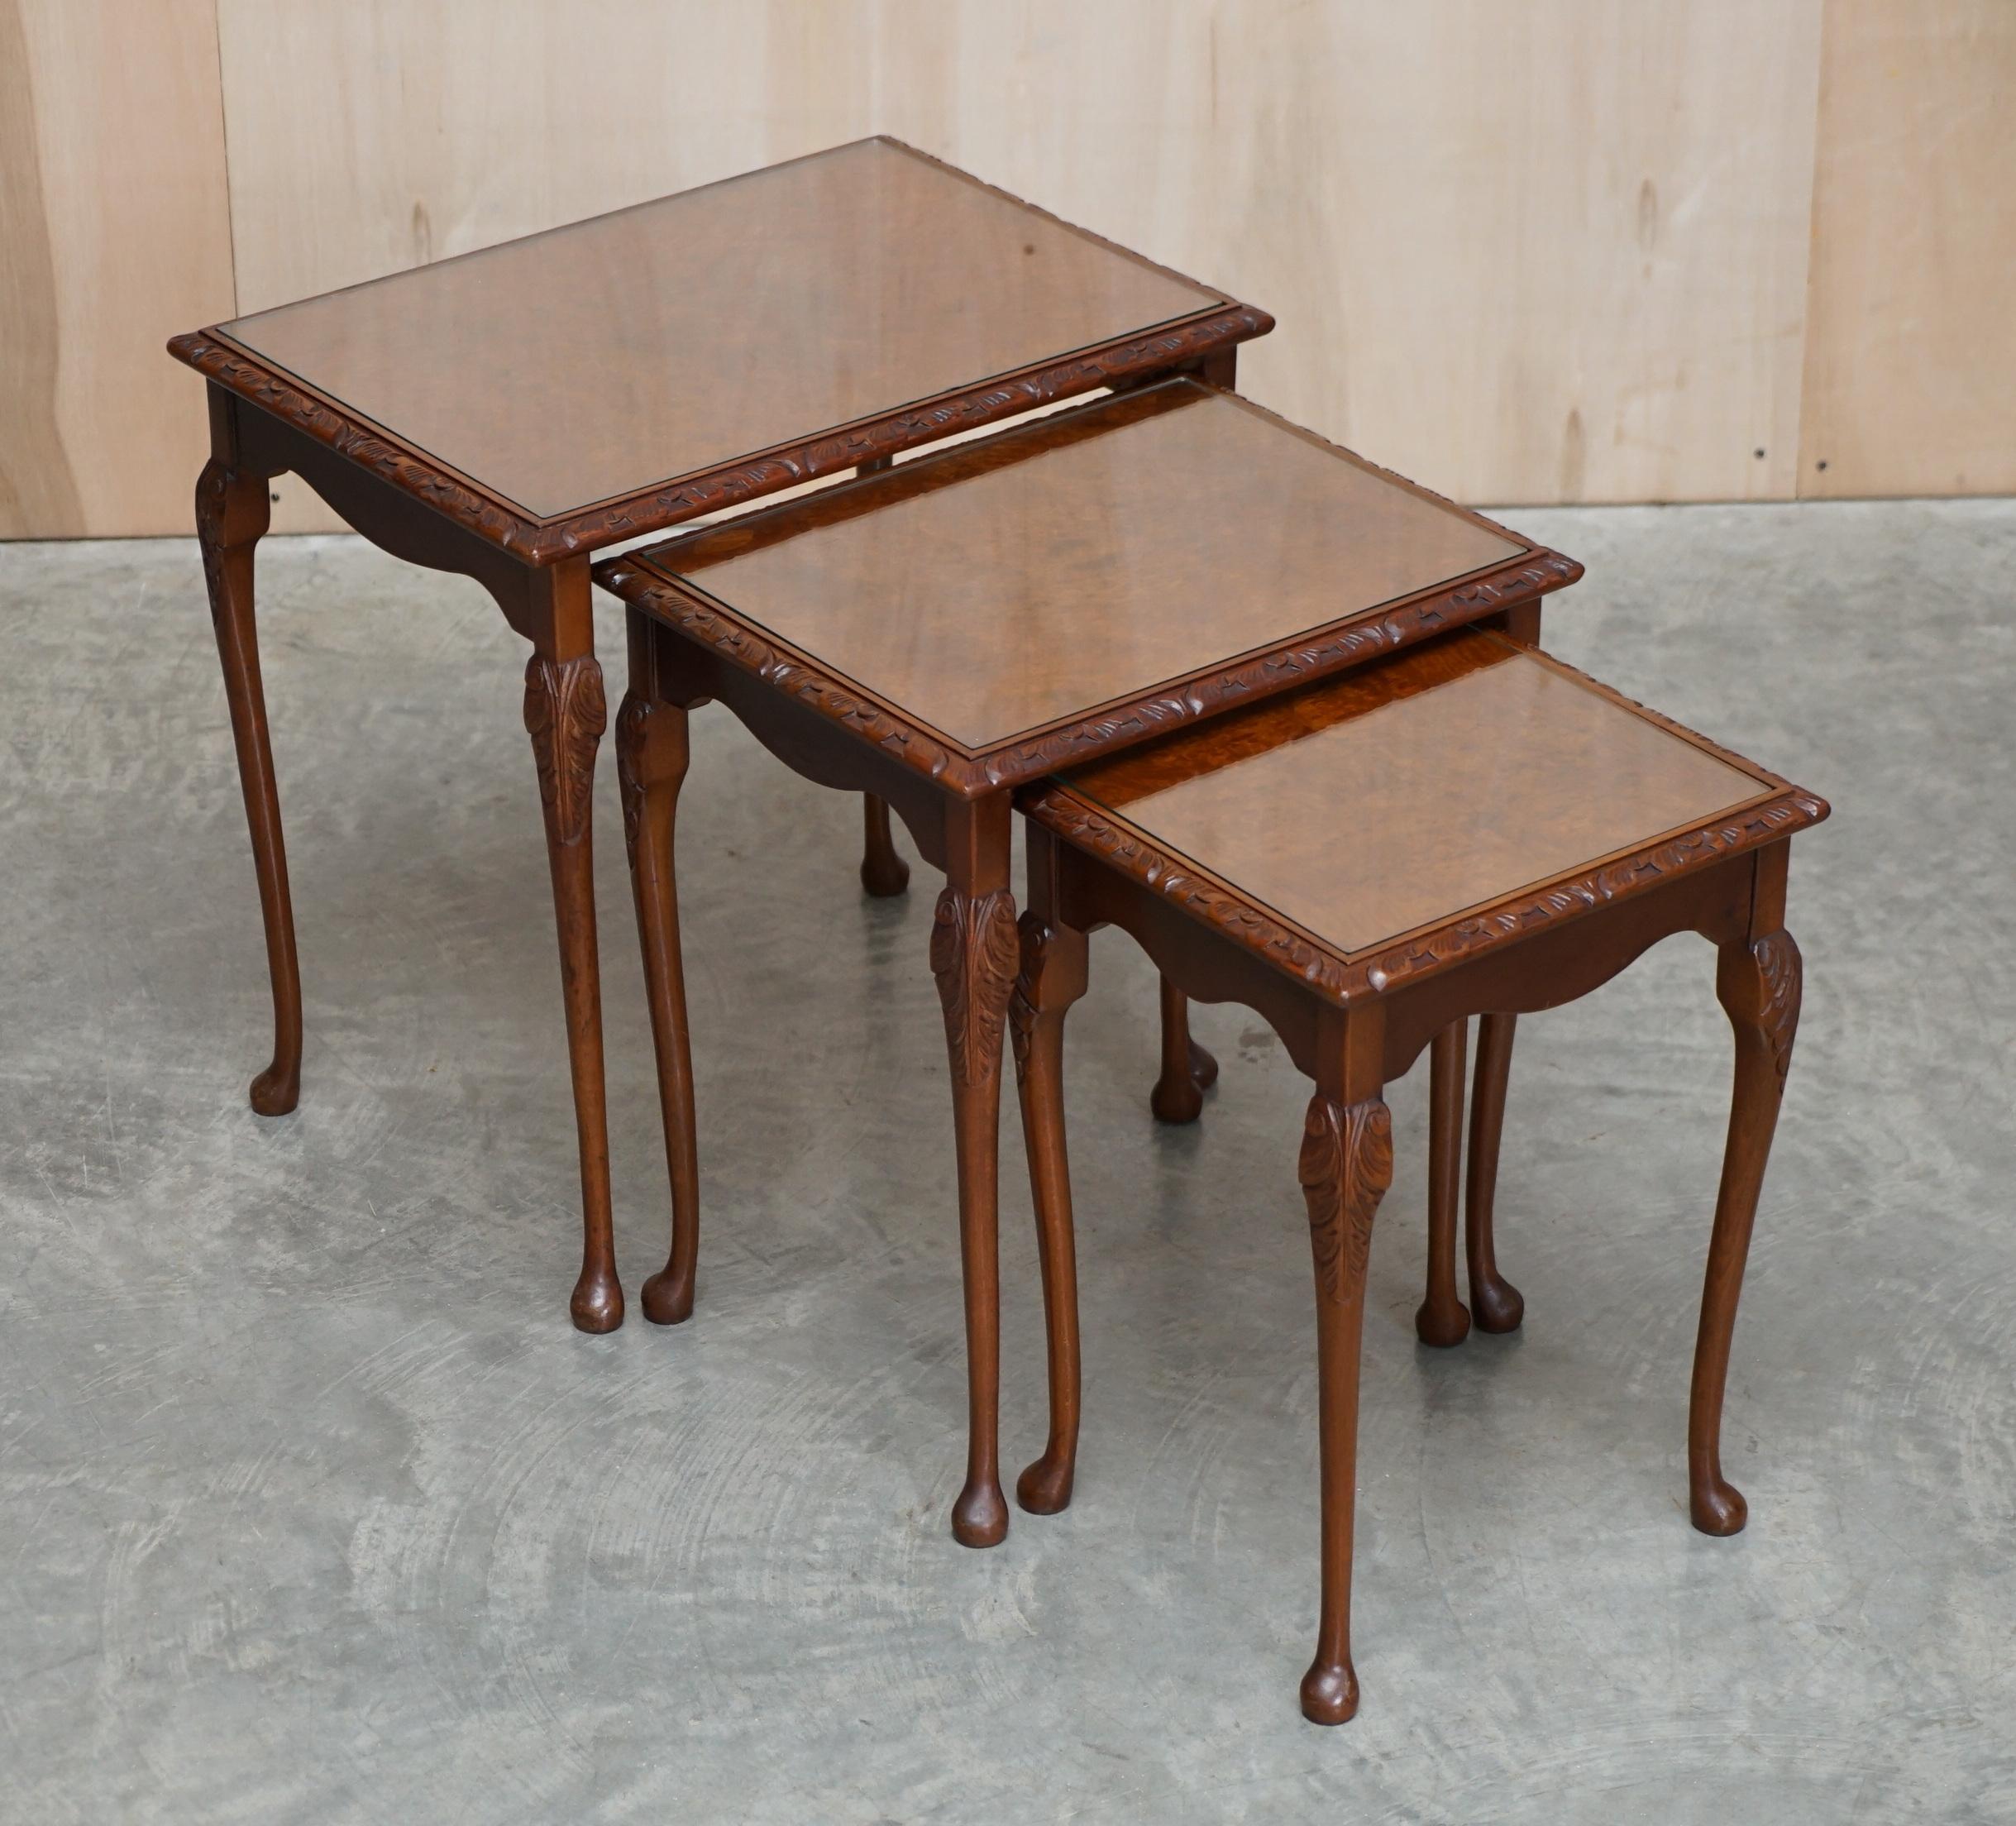 We are delighted to offer for sale this lovely vintage suite of Burr Walnut nest of tables 

A good looking, well made and decorative suite, each table has a lovely patinated top, they stack perfectly away, the design was invented by Thomas